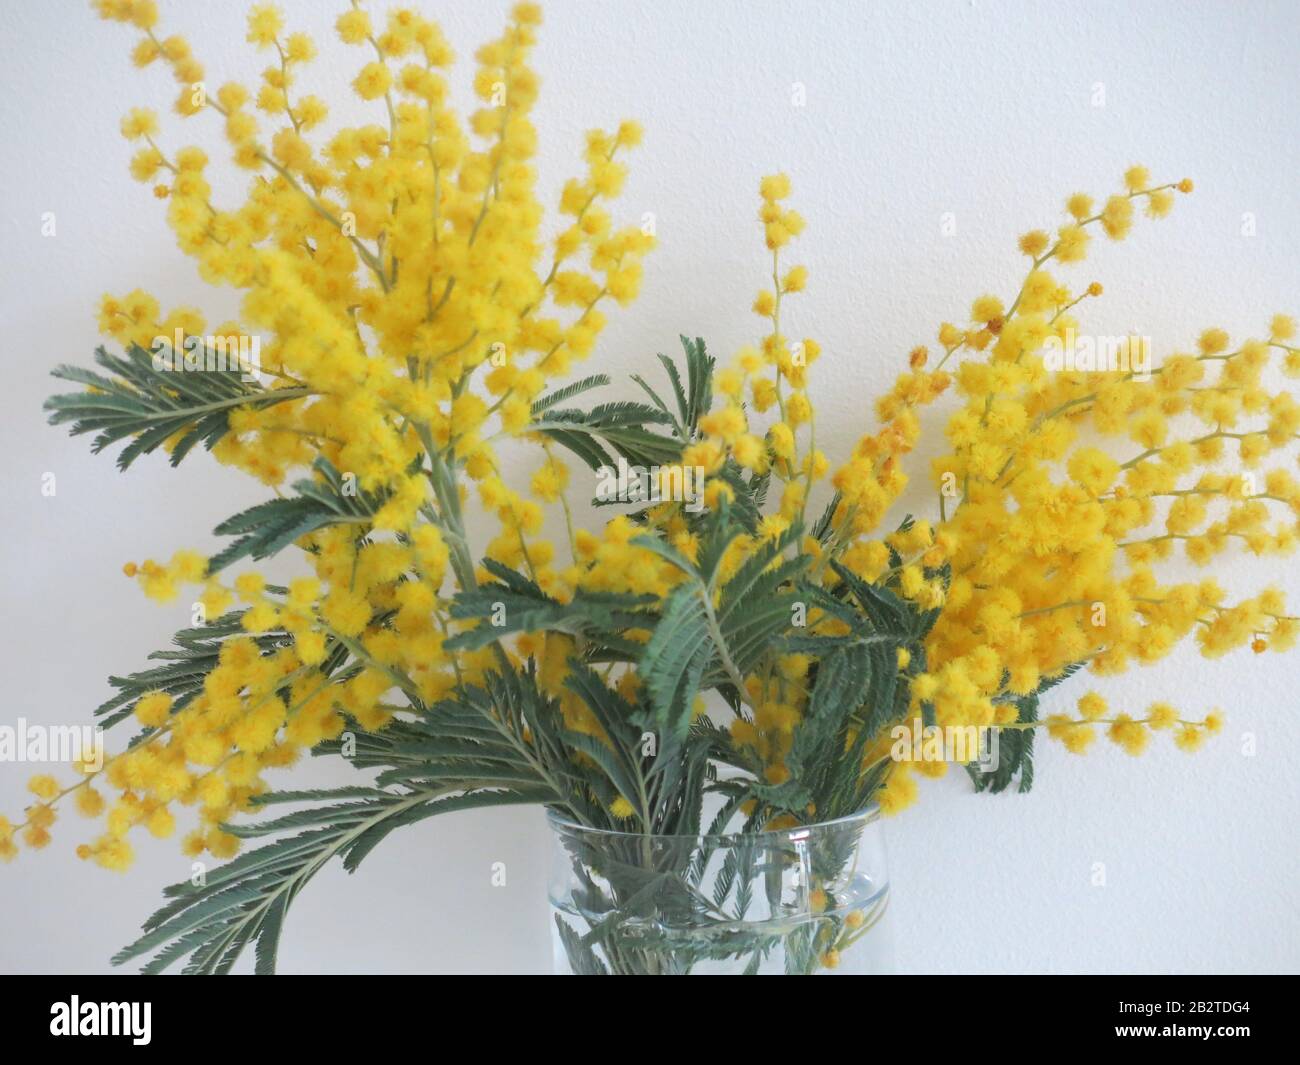 Three sprigs of mimosa with its bright yellow pom-poms and ferny foliage in a small glass vase Stock Photo